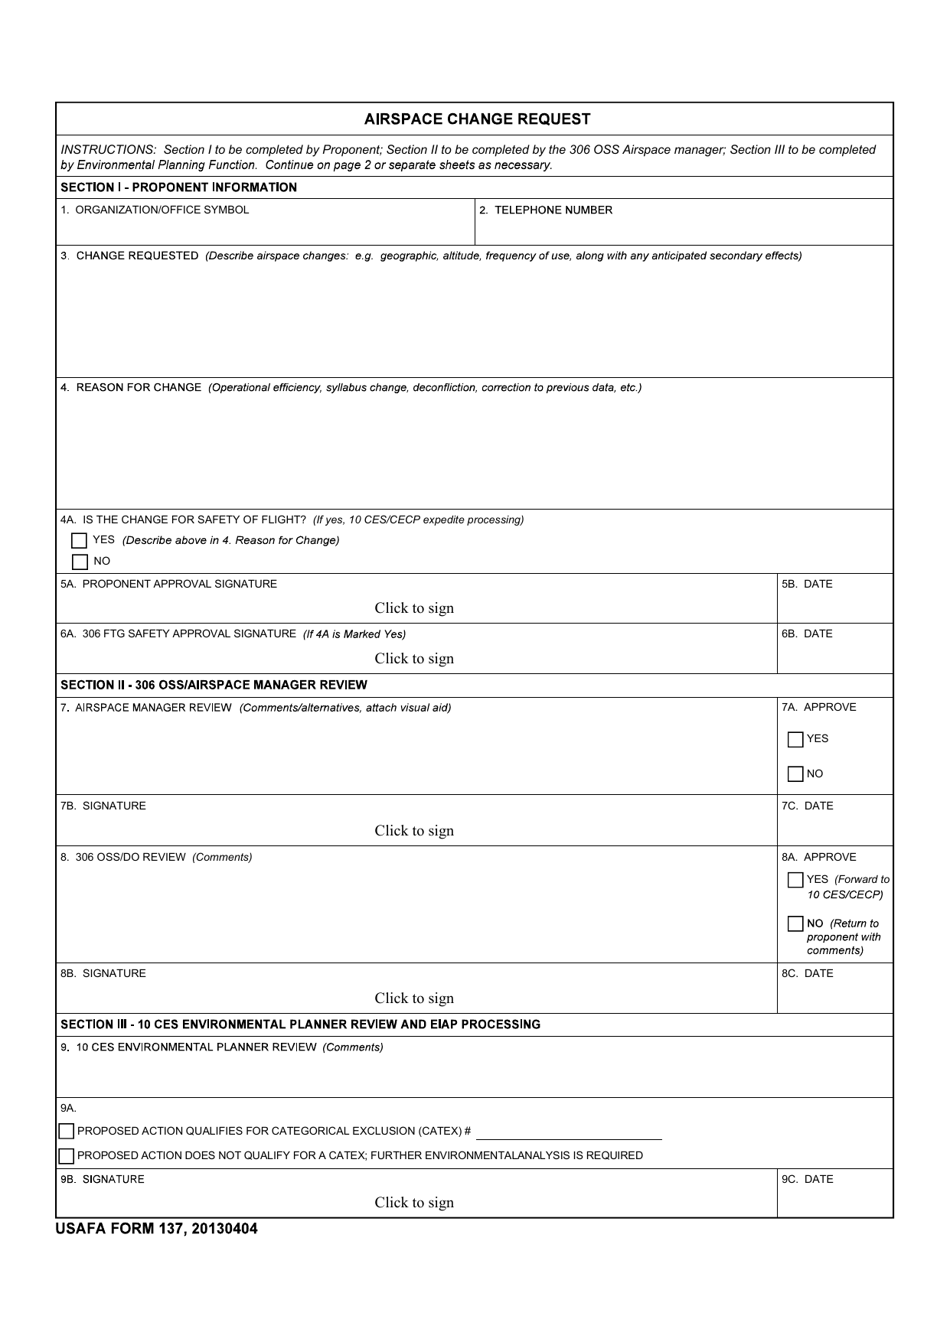 USAFA Form 137 Airspace Change Request, Page 1